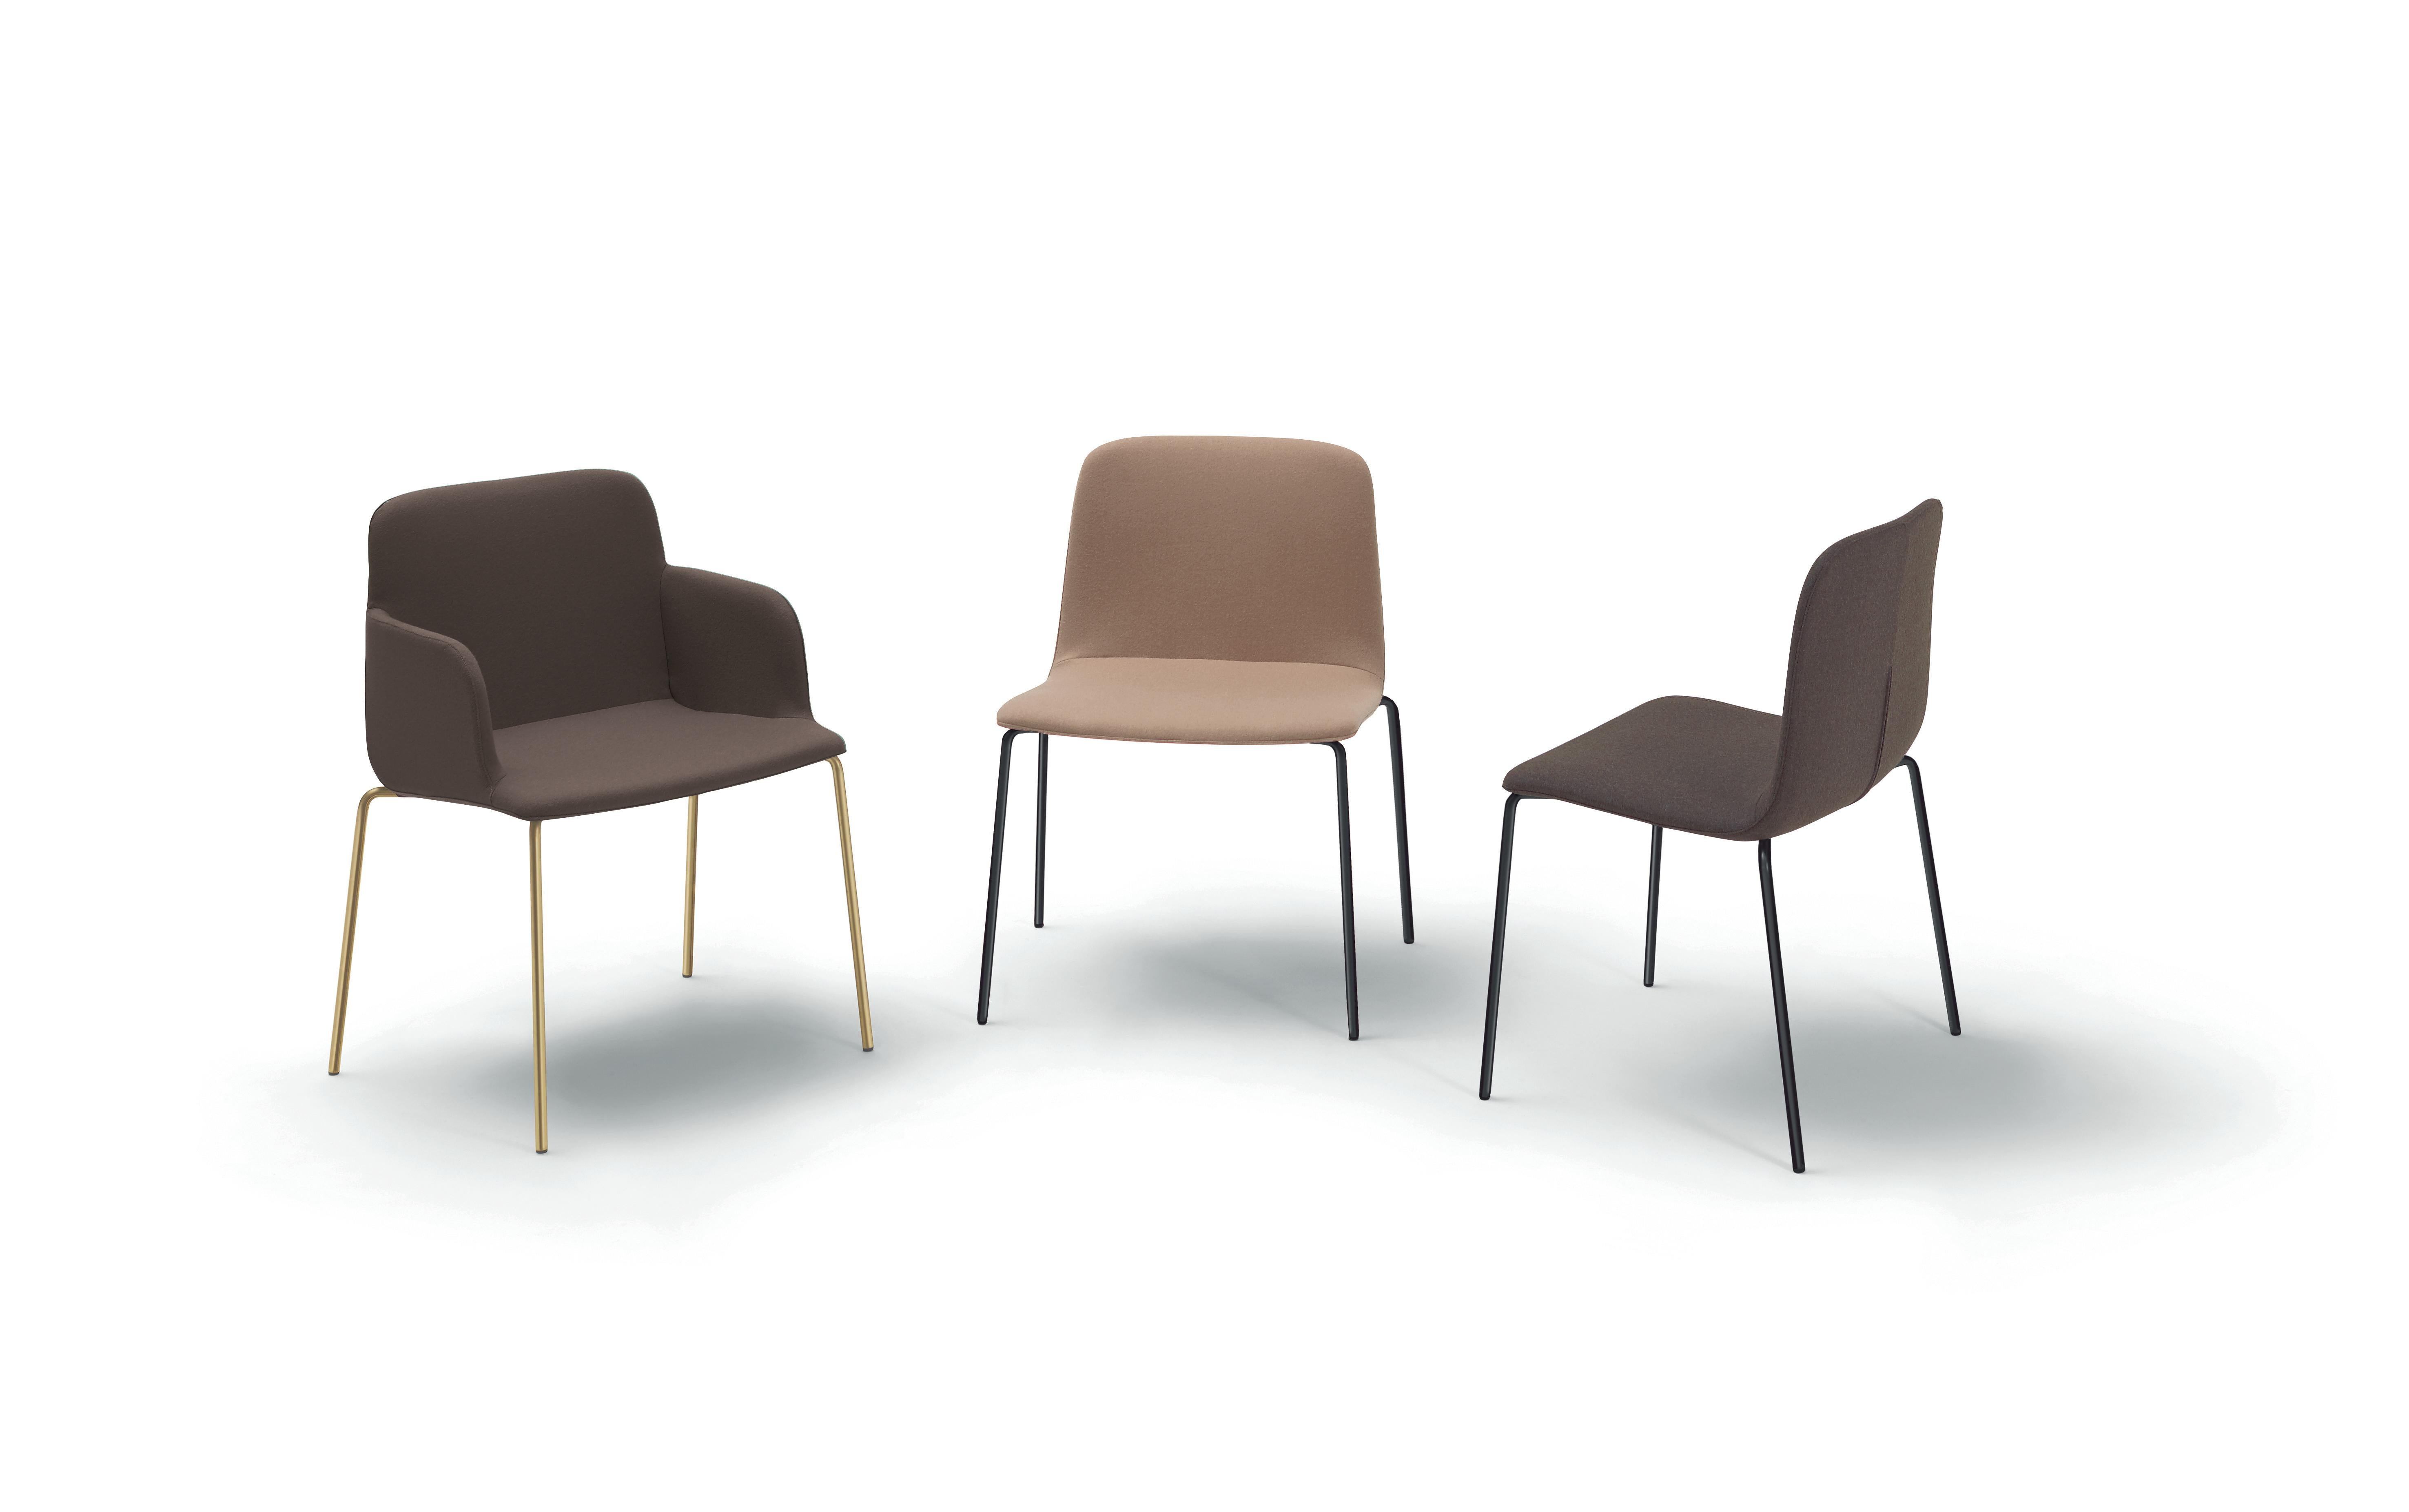 Its feature is the extra width. In fact, it is slightly wider than most chairs, making it feel more luxurious than other chairs in this typology, without using more floor space than an usual chair.

Materials: Upholstered Fabric
Structure: